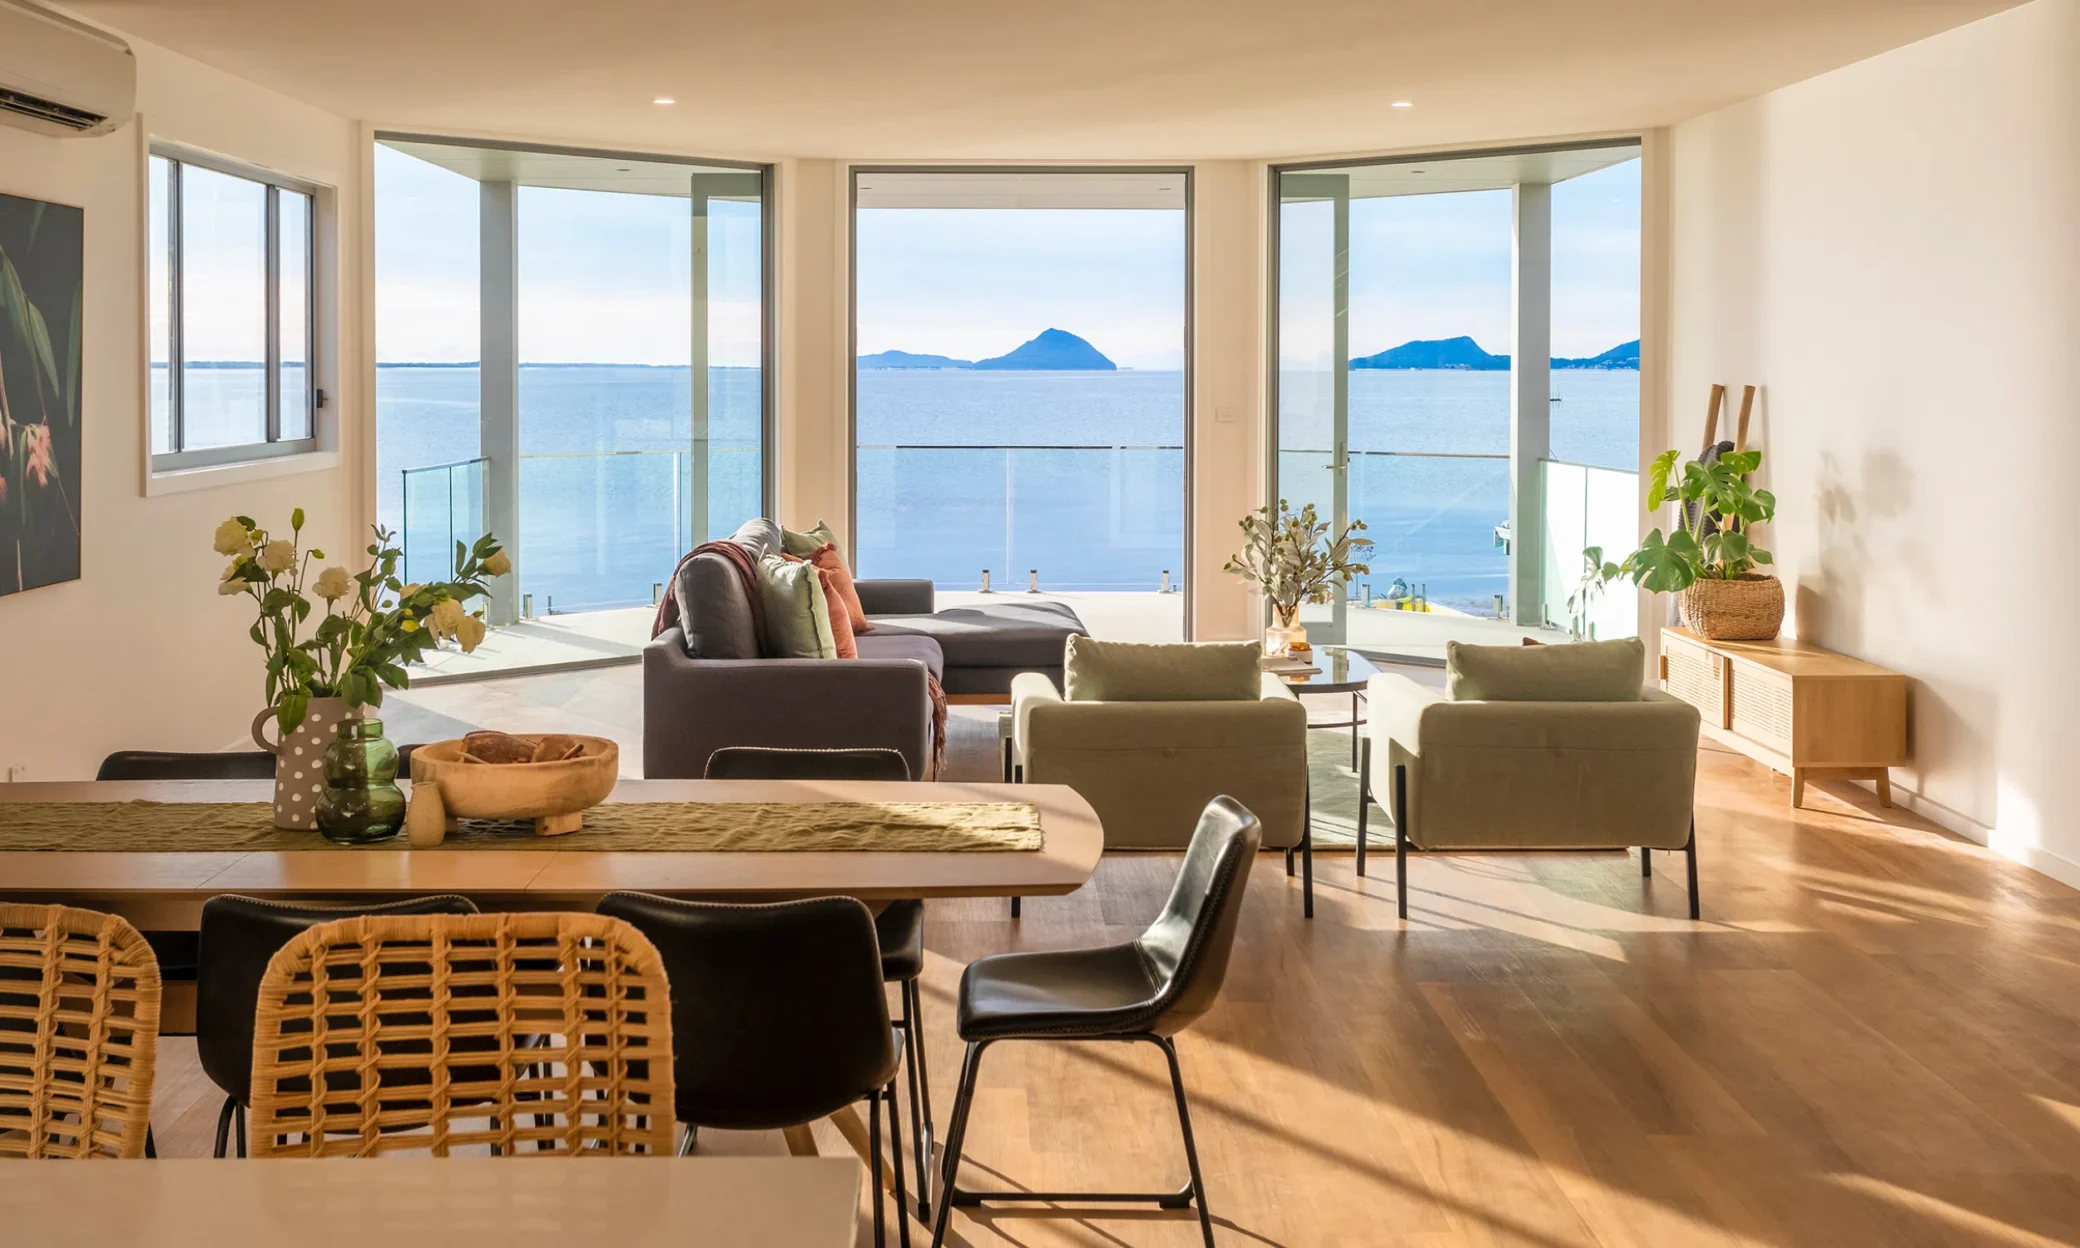 A modern living room in Nelson Bay with large windows offering a panoramic view of a calm sea and distant mountains. The room features a dining table, chairs, a sofa, armchairs, and p